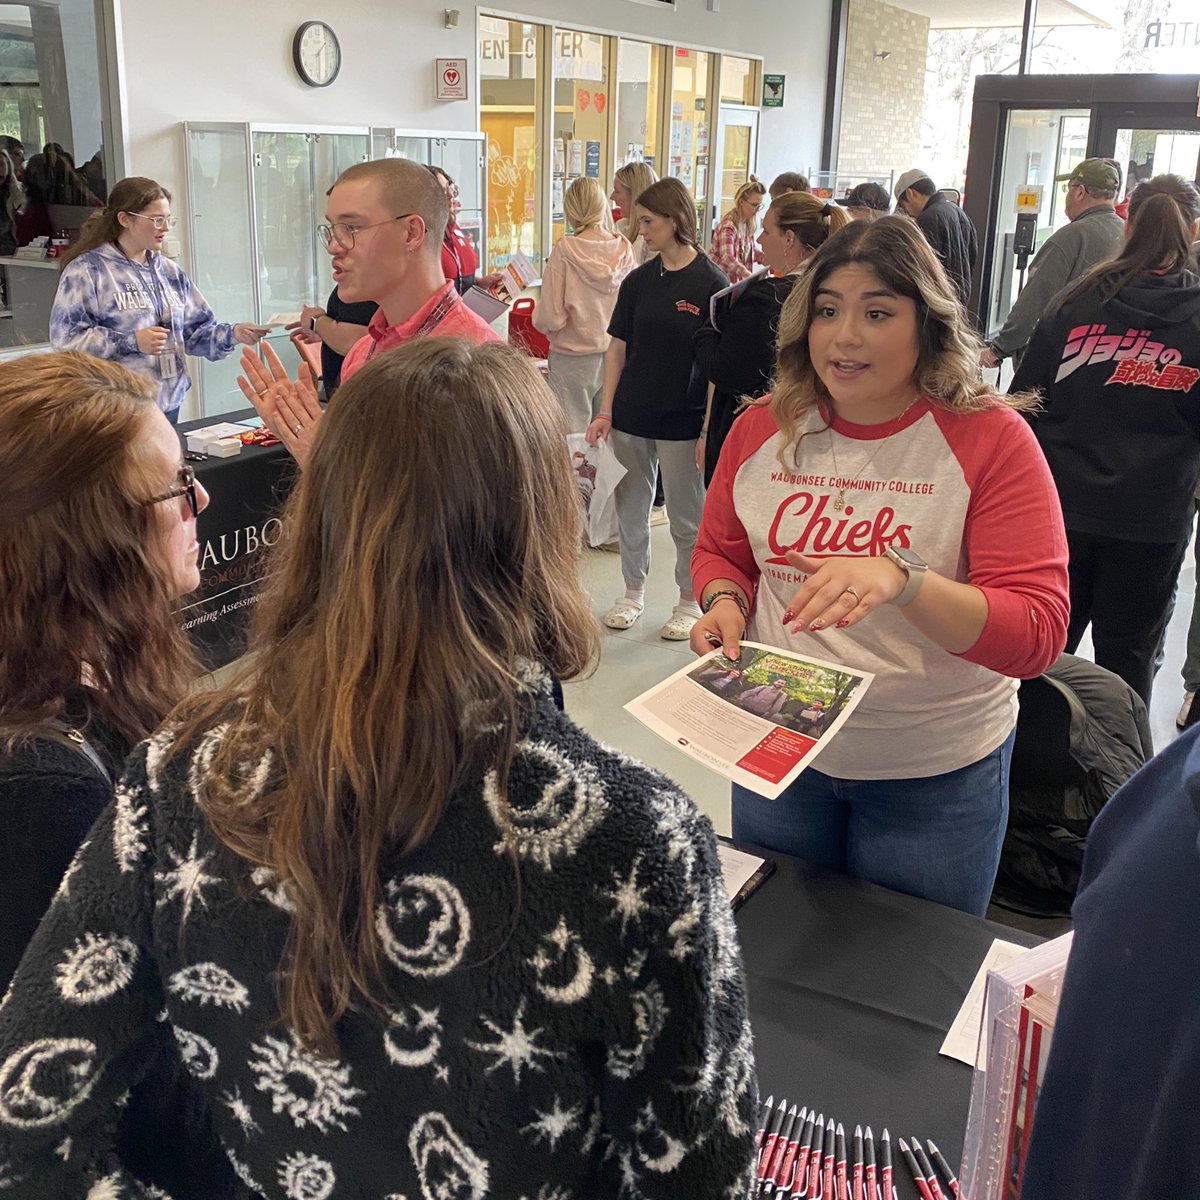 🎉 Join us today, 4/20, until 3 p.m. for the #Waubonsee Sugar Grove Open House! 📚 Tour Campus Spaces 🎓 Explore Academic Programs 💵 Gain #FinAid & Scholarship Info 🎷 Enjoy Treats, Music, & Giveaways 🏀 Discover Clubs & Athletics